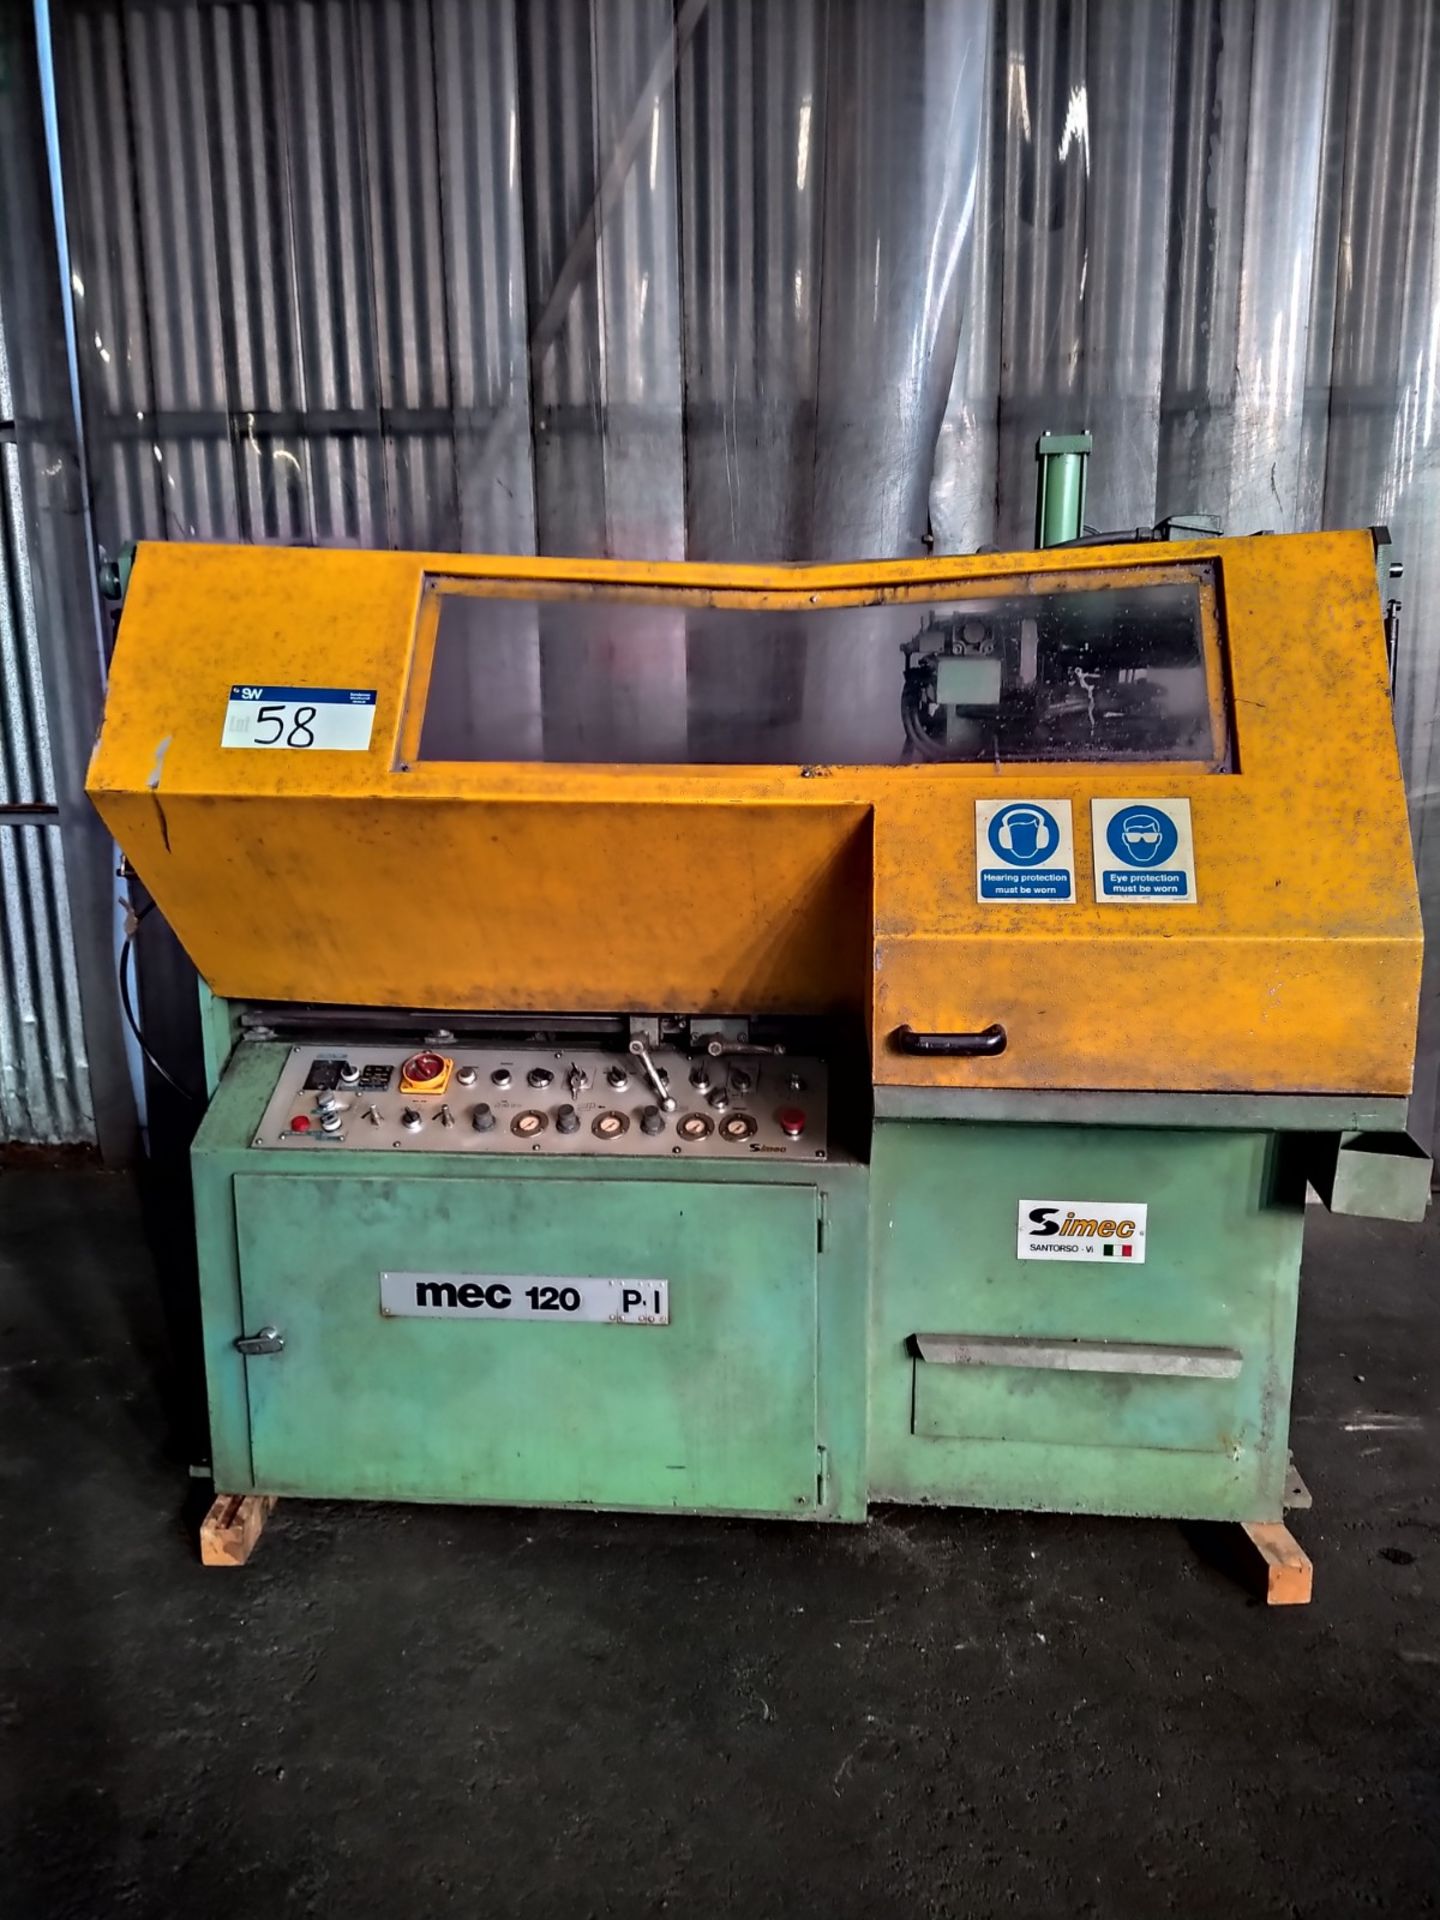 Simec SRL ME 120 Circular Auto Saw, year of manufacture 1990, free loading onto purchasers transport - Image 9 of 16